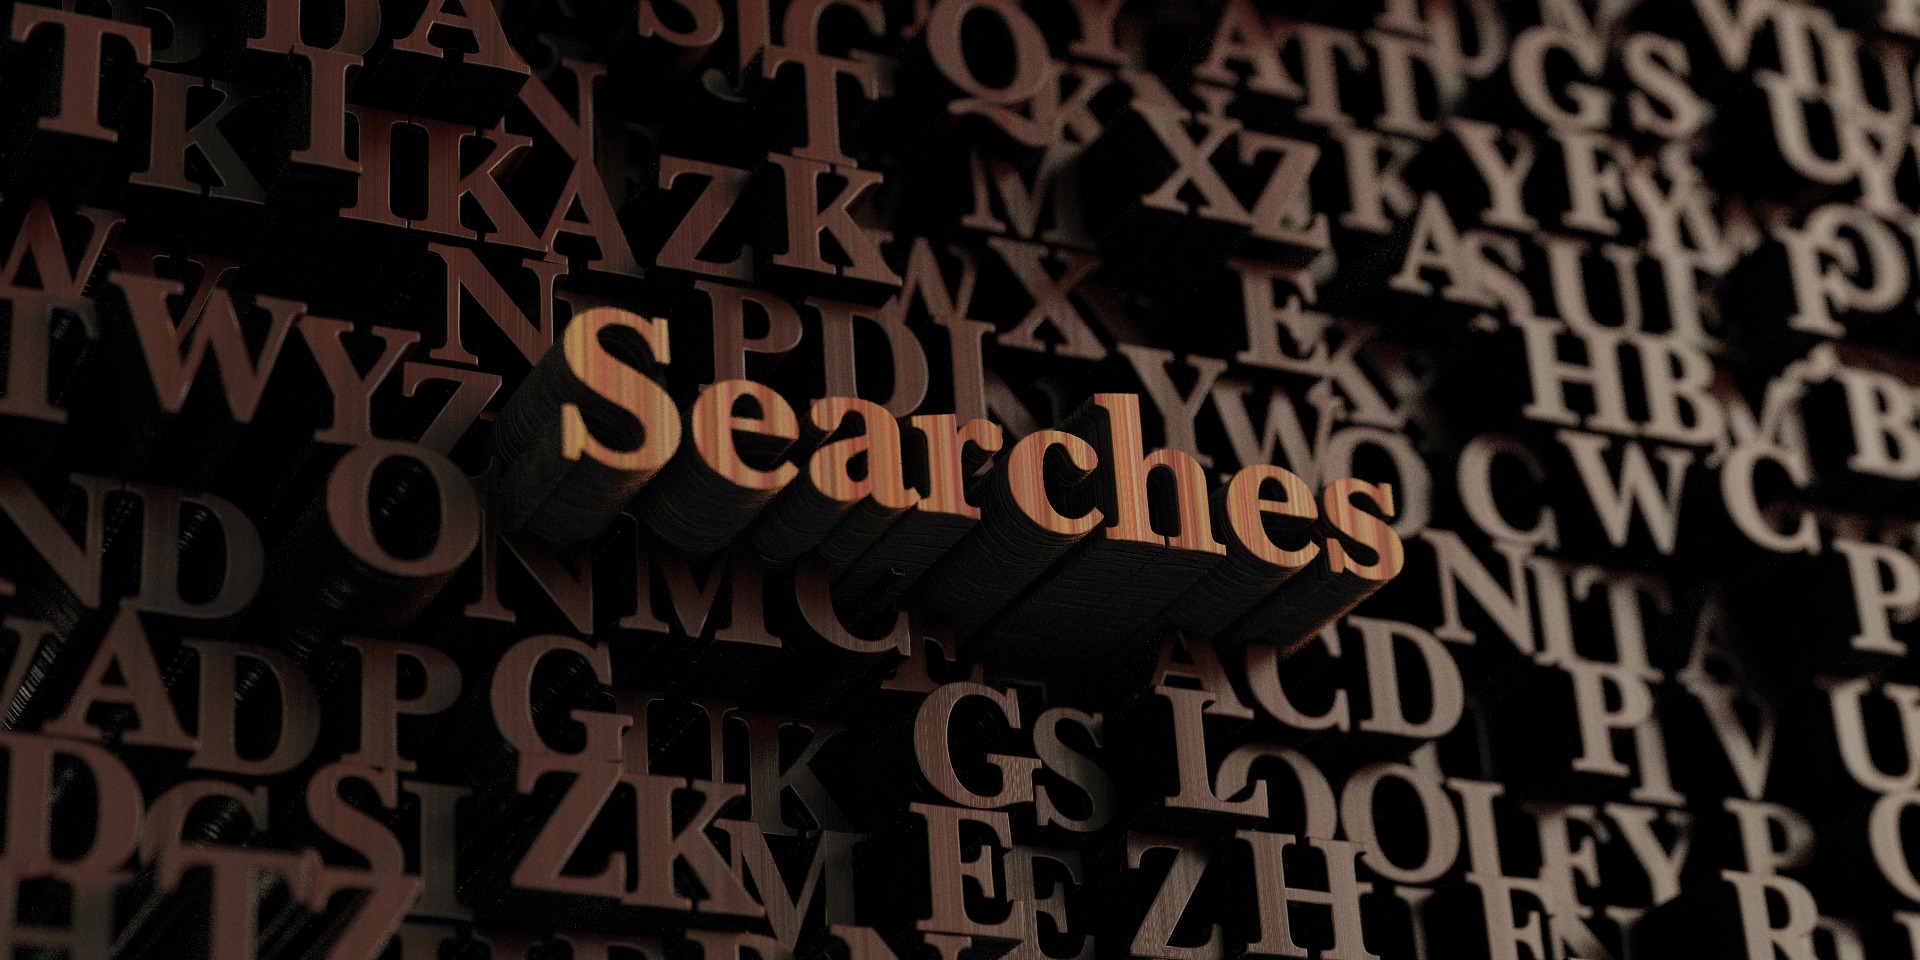 'Searches' in brown, block letters, surrounding by a random assortment of other letters.